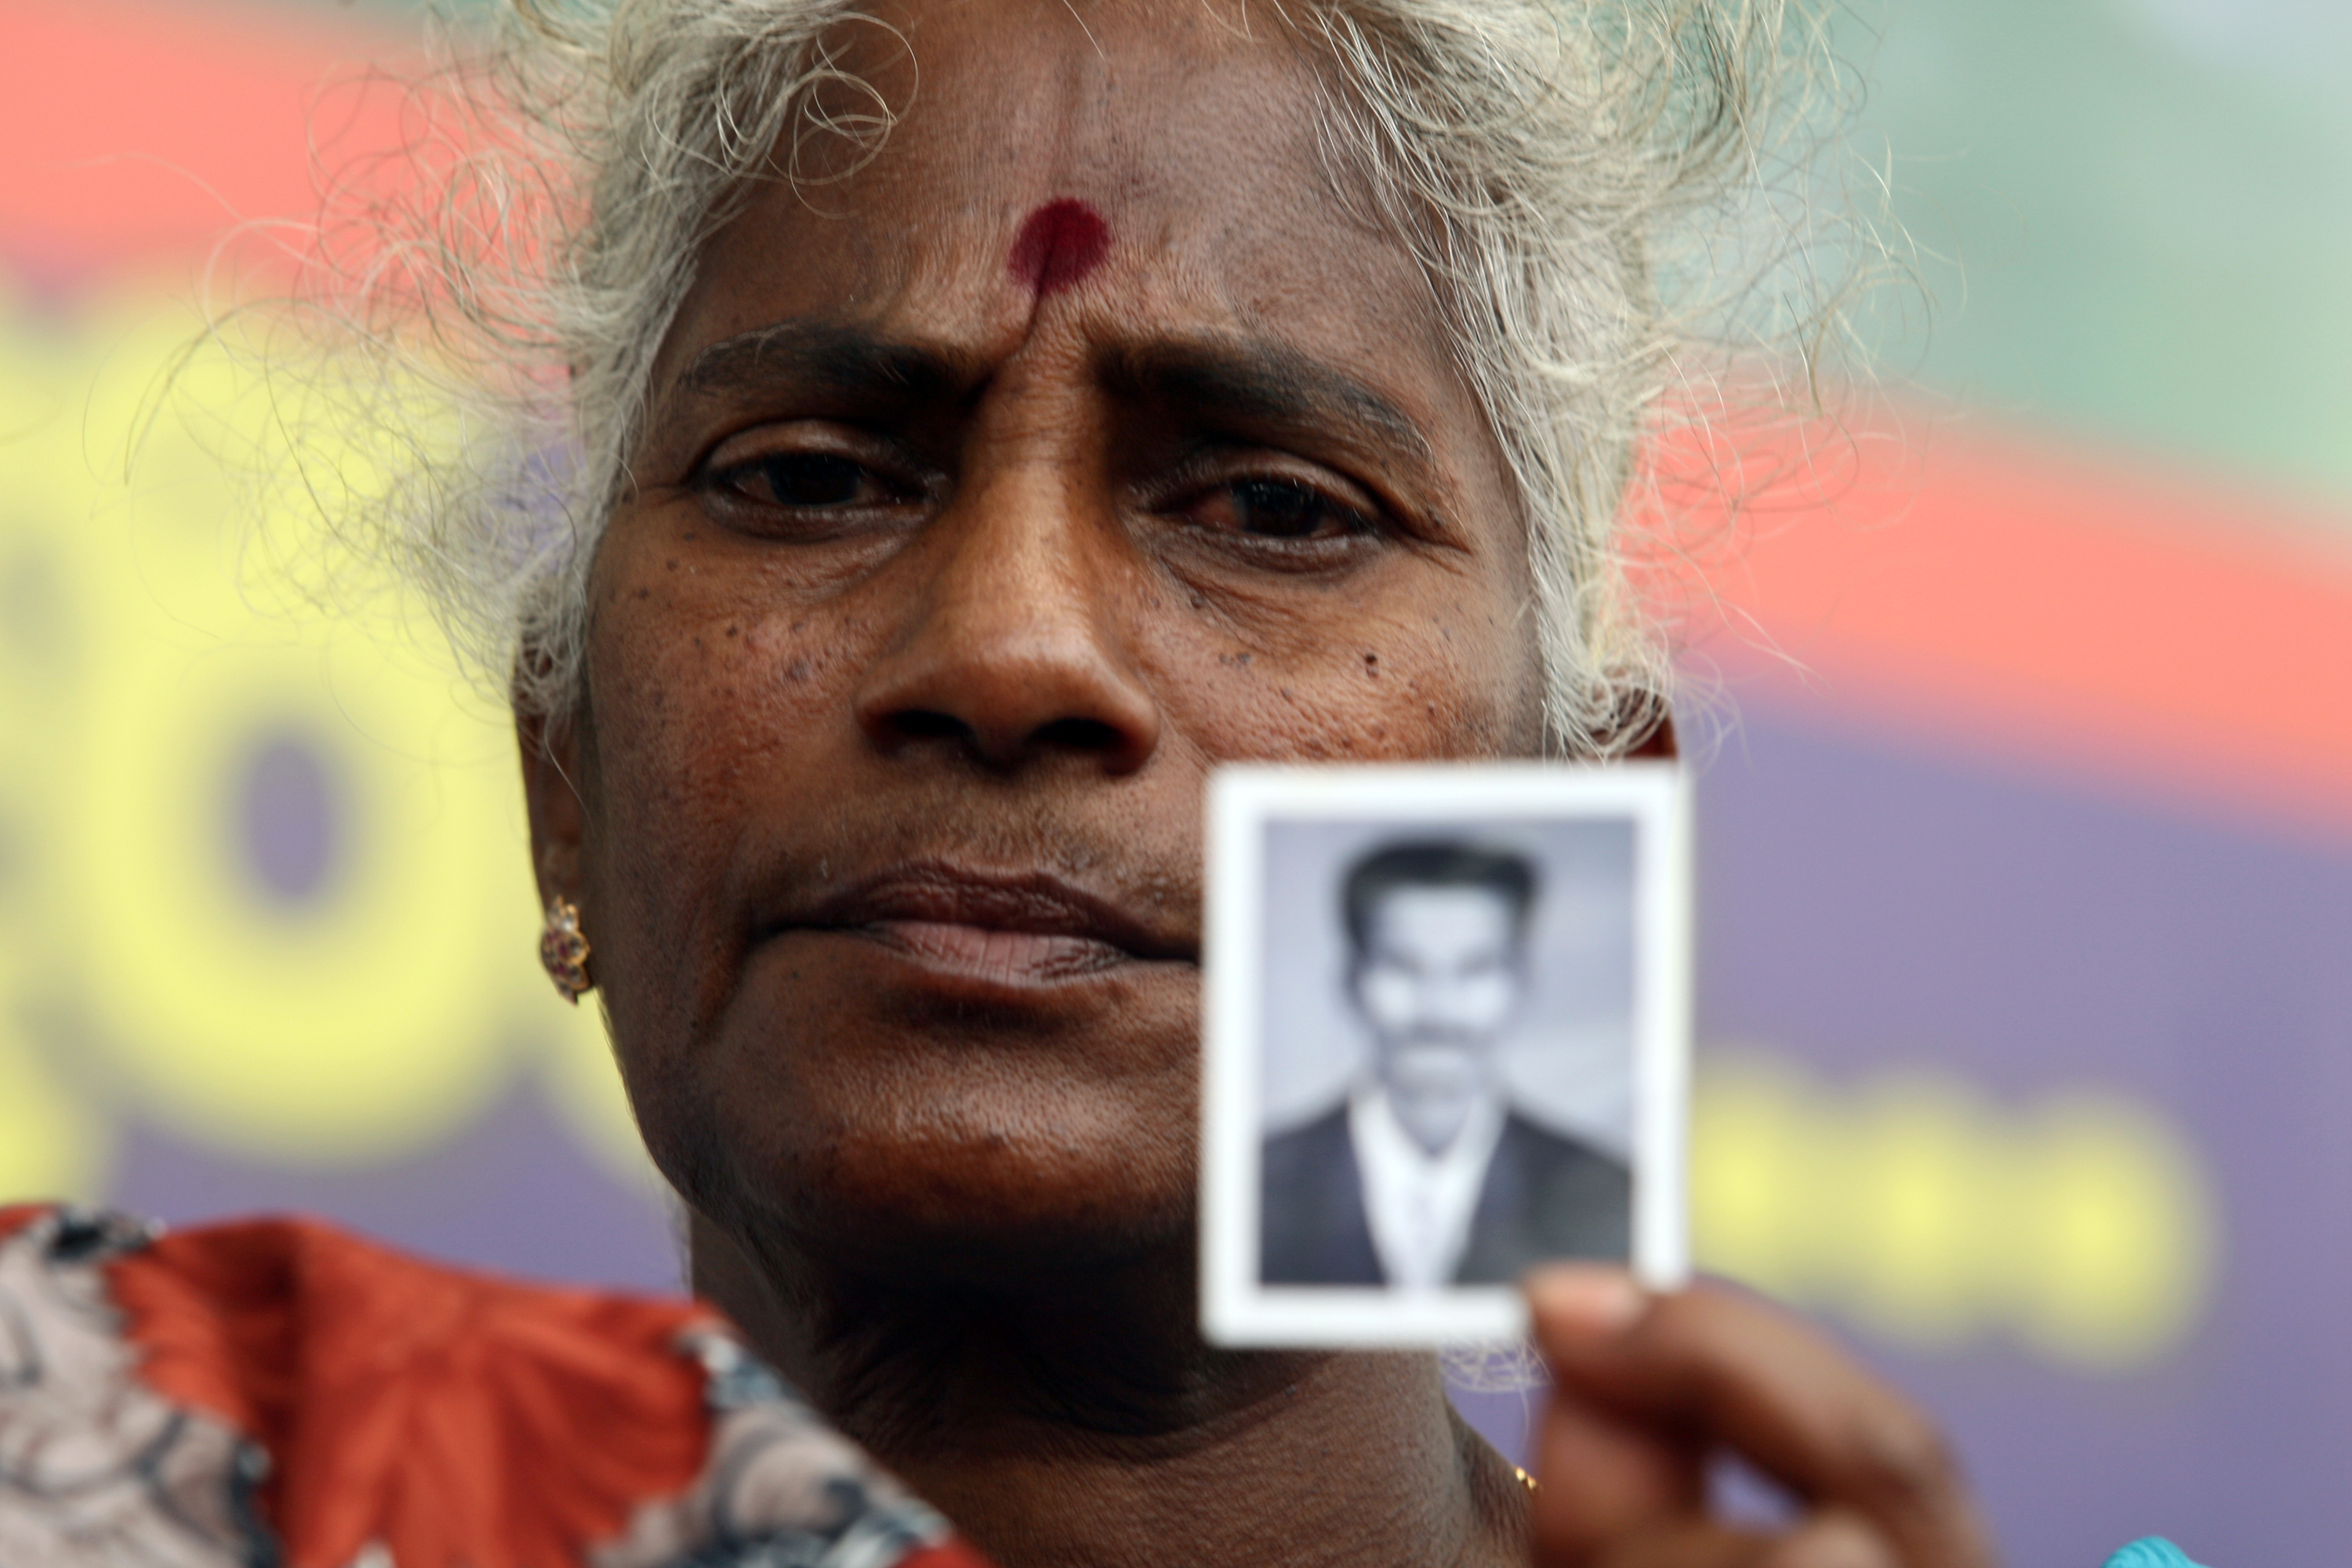 Relatives And Activists Demand Freedom For Political Prisoners In Colombo